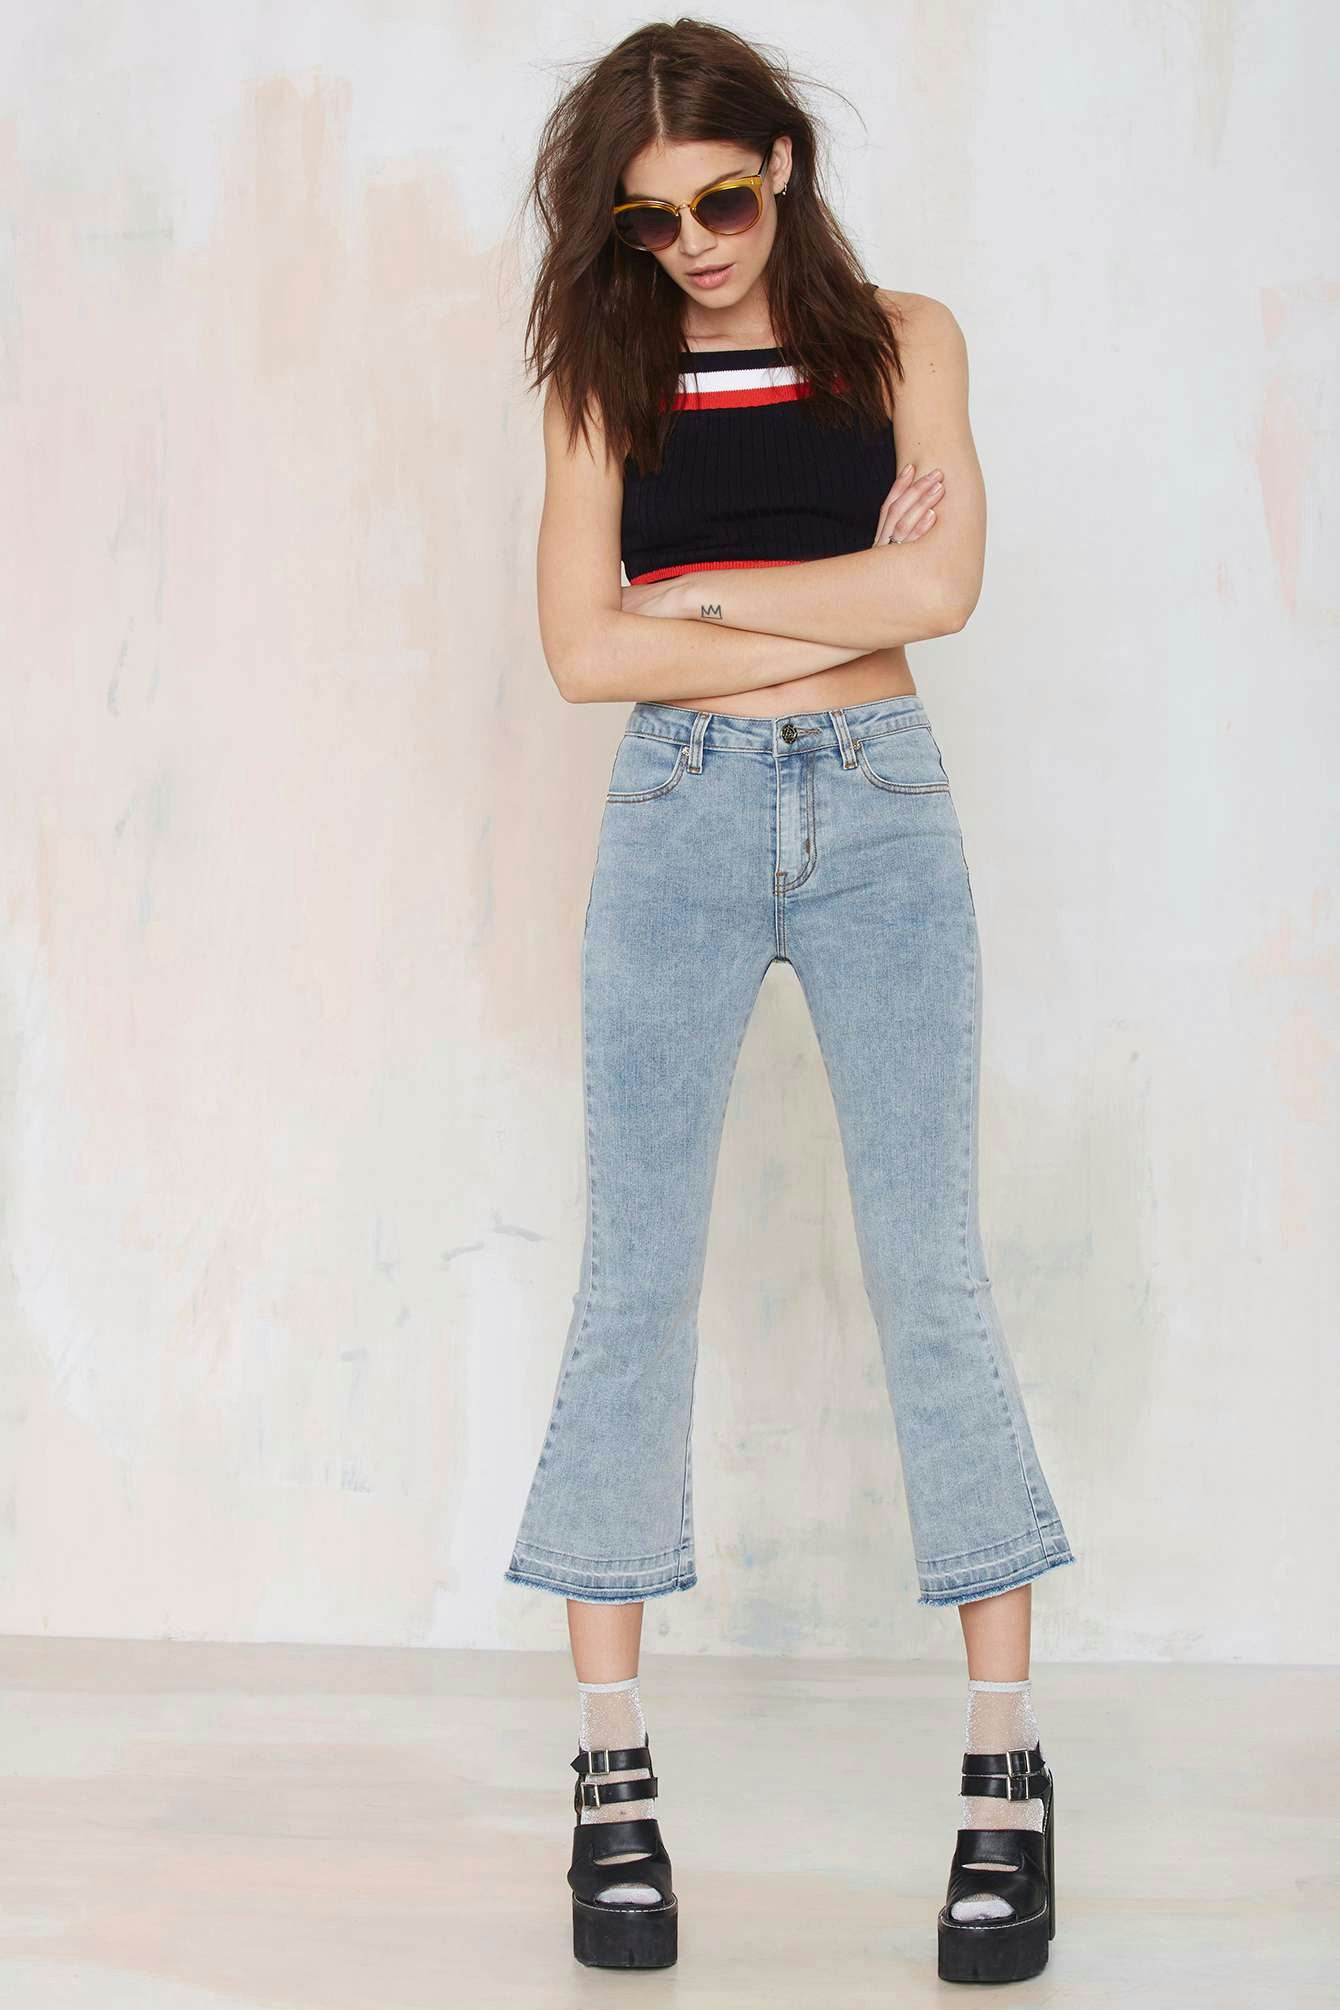 10 Best Cropped Flare Denim Jeans